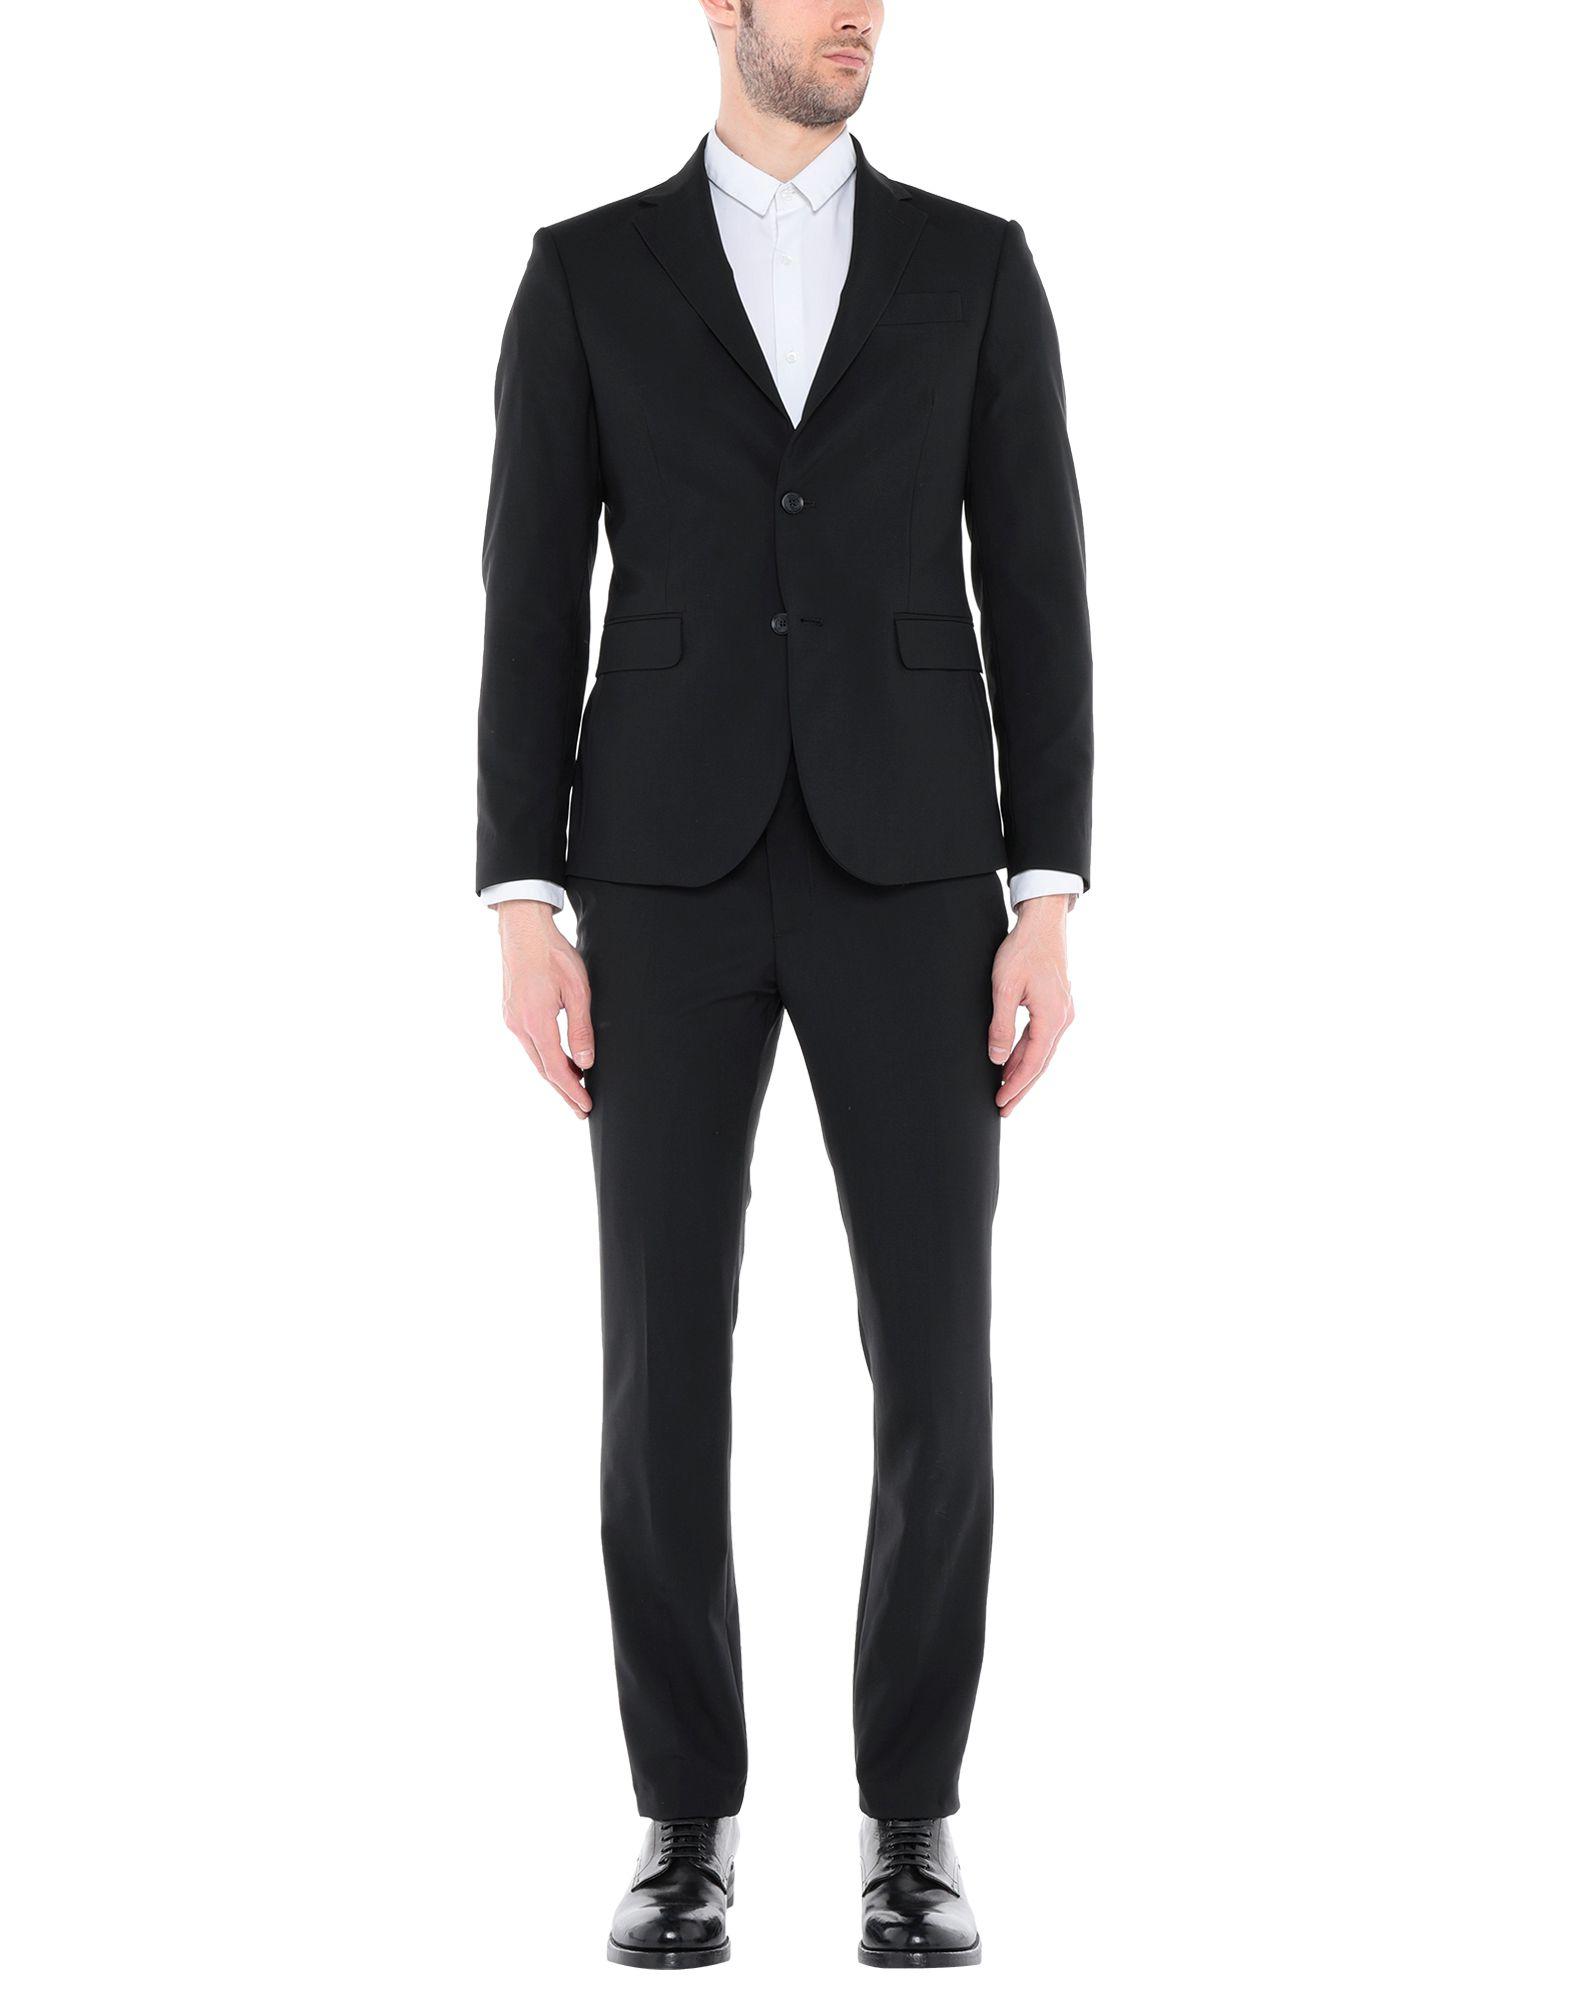 Guess Wool Suit in Black for Men - Lyst